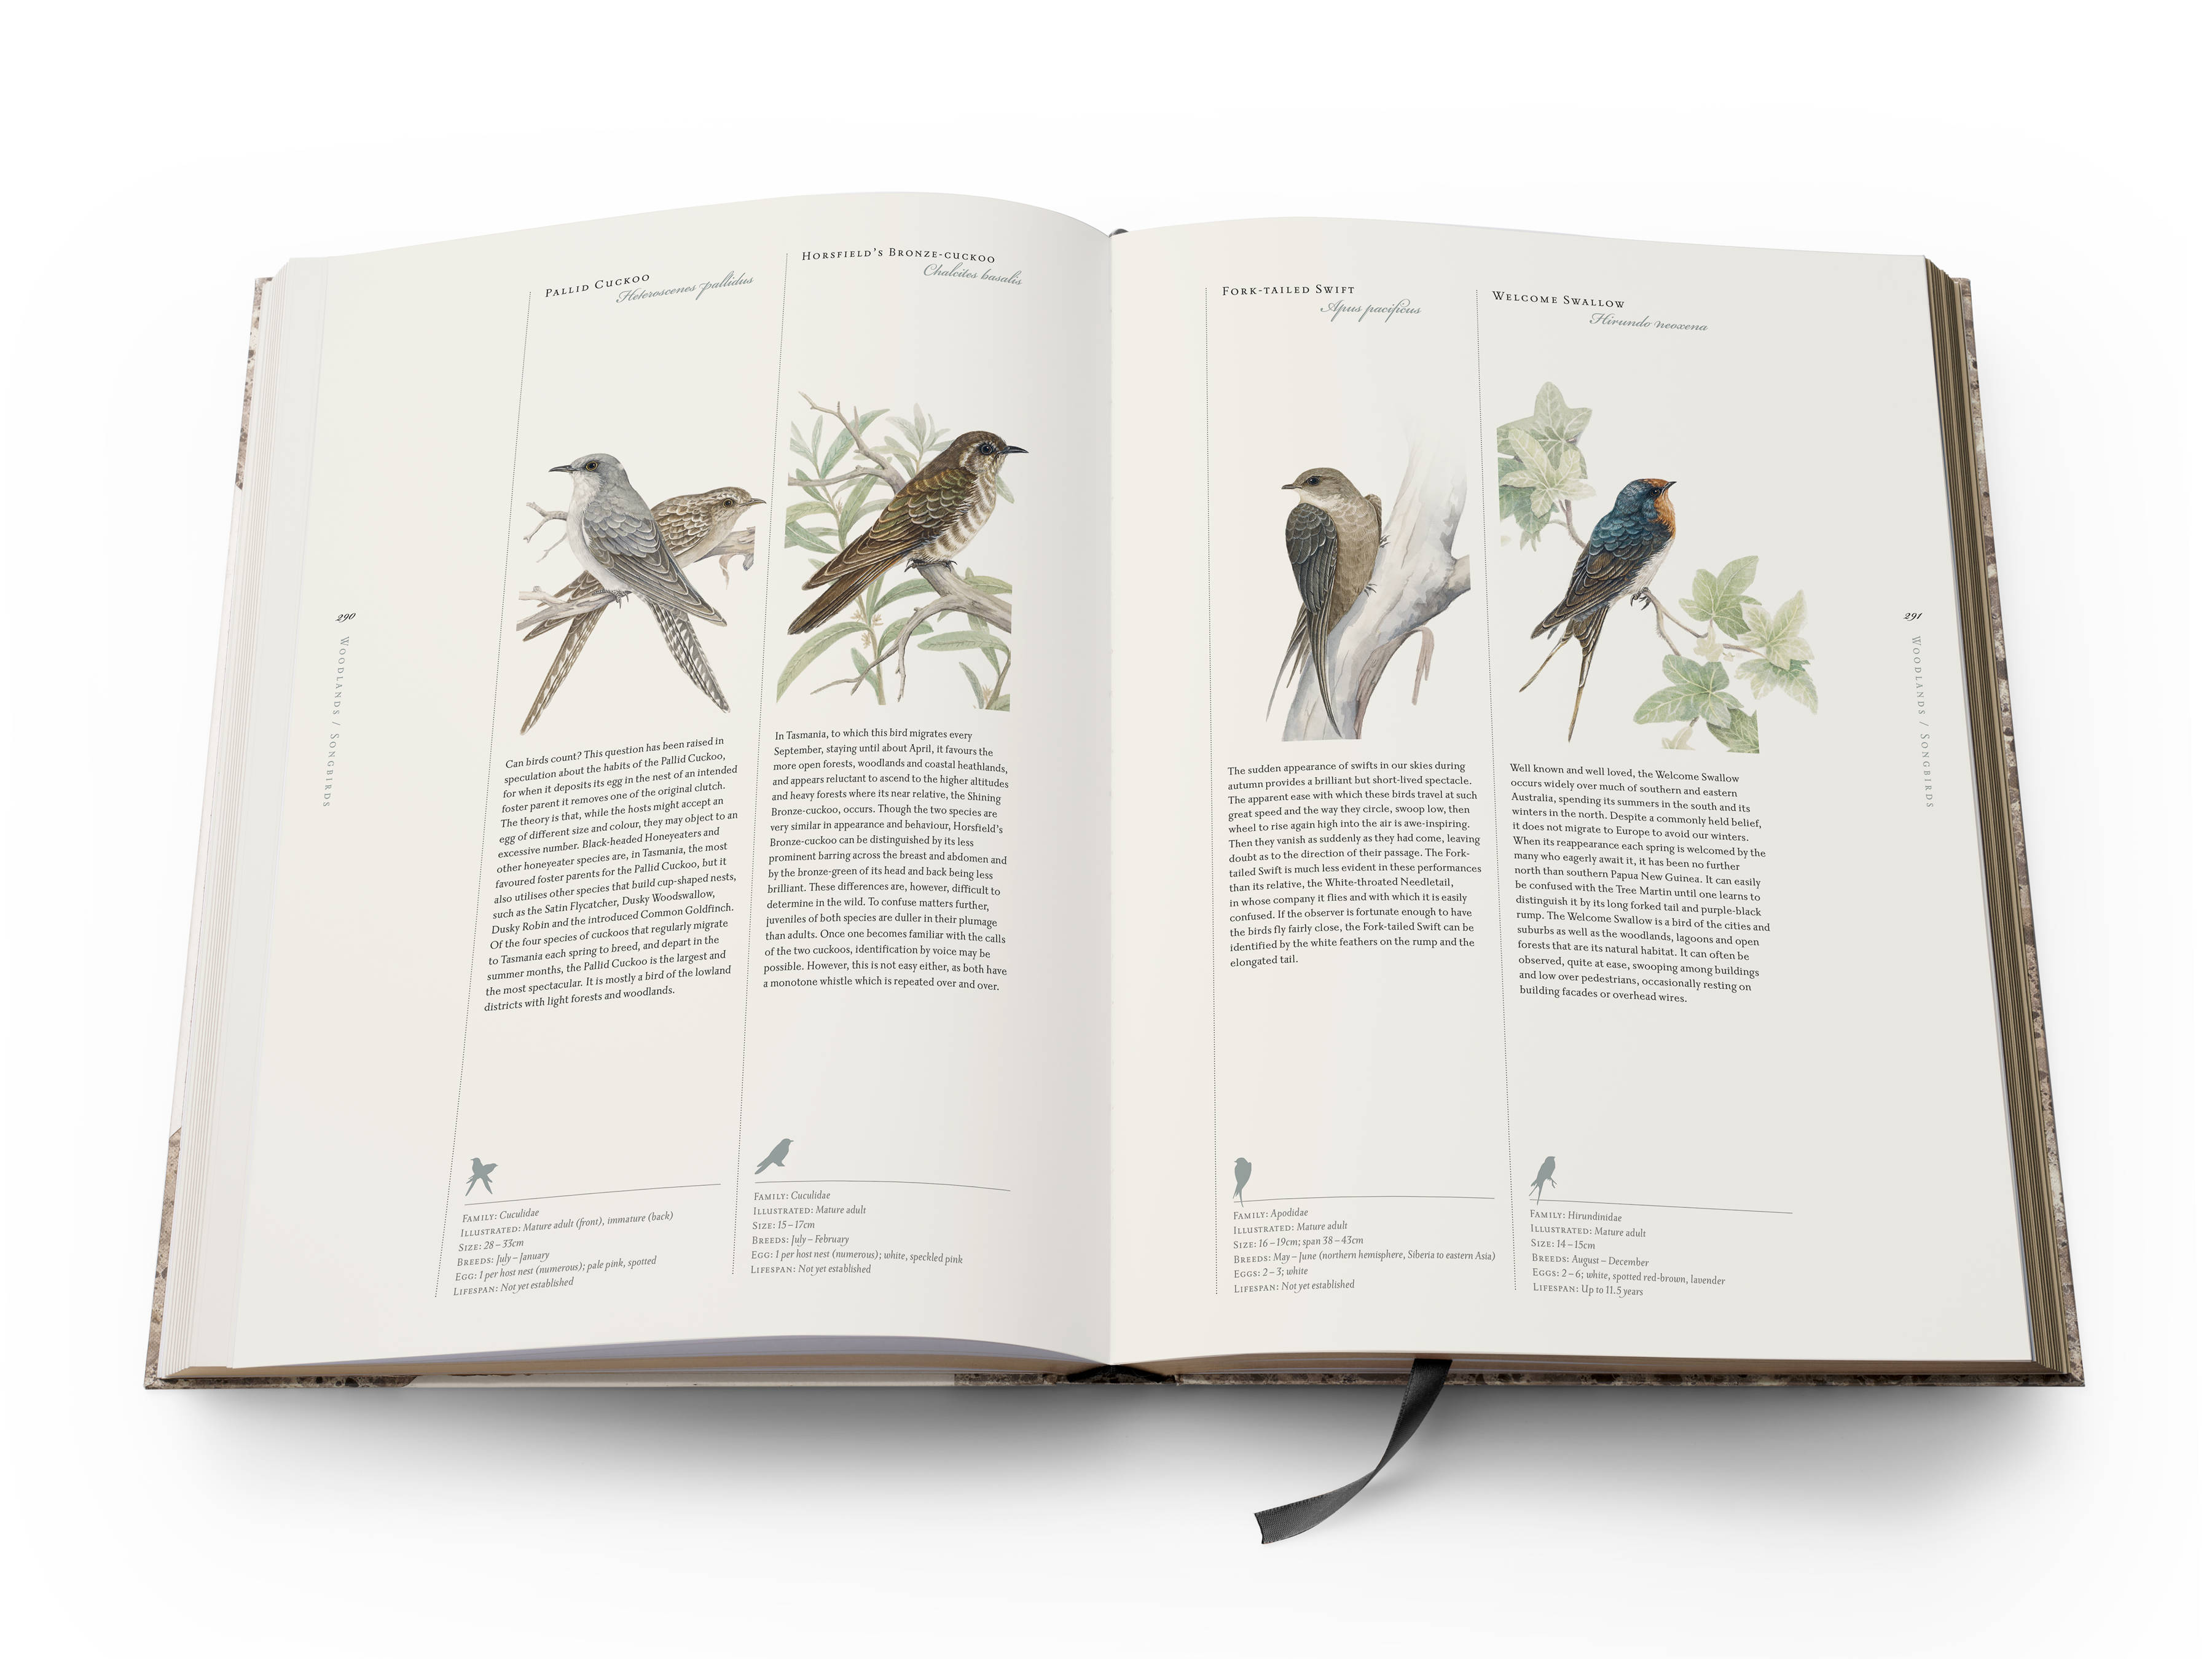 A double page spread from the book with 4 half-page colour plates pictured from left to right:  Pallid Cuckoo ‘Heteroscenes pallidus’, Horsfield’s Bronze-cuckoo ‘Chalcites basalis’, Fork-tailed Swift ‘Apus pacificus’, Welcome Swallow ‘Hirundo neoxena’.